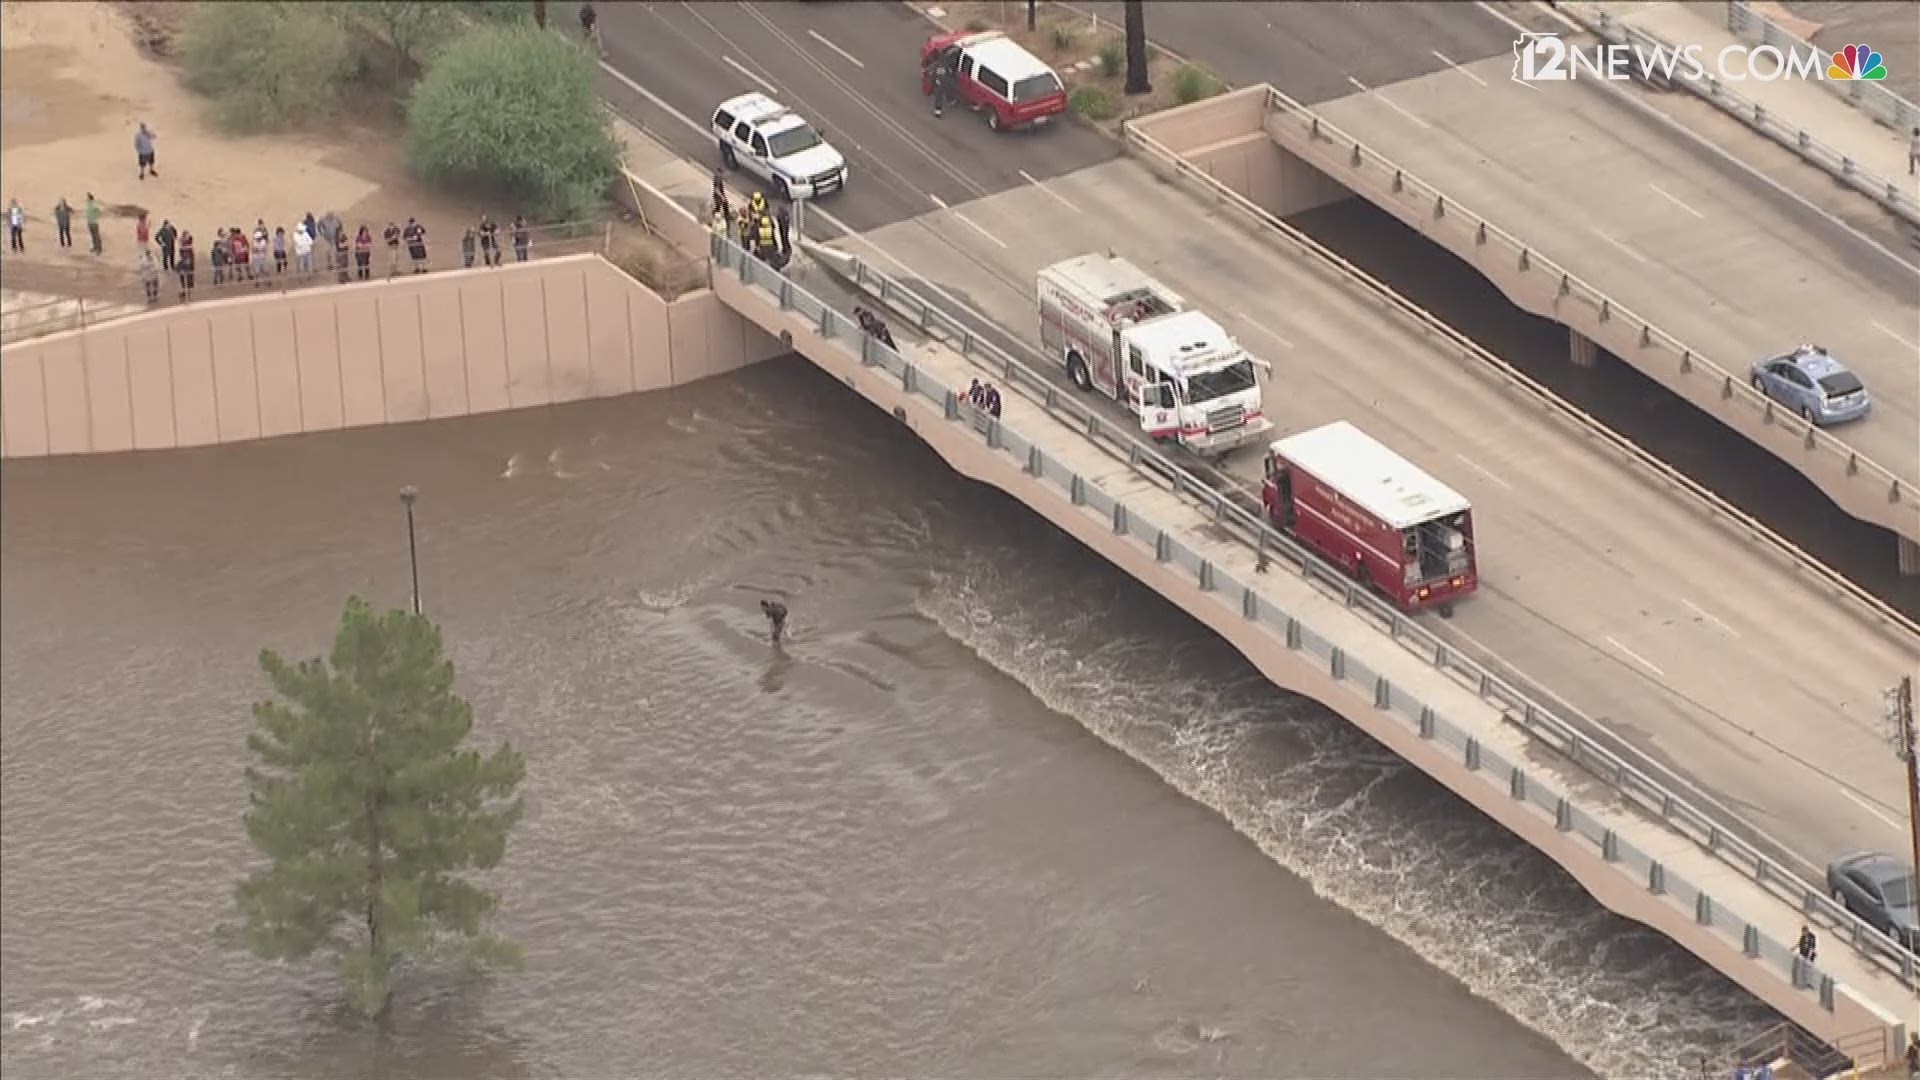 A man got trapped in flood waters near McDowell and Miller roads. Scottsdale fire went into El Dorado wash to rescue him.